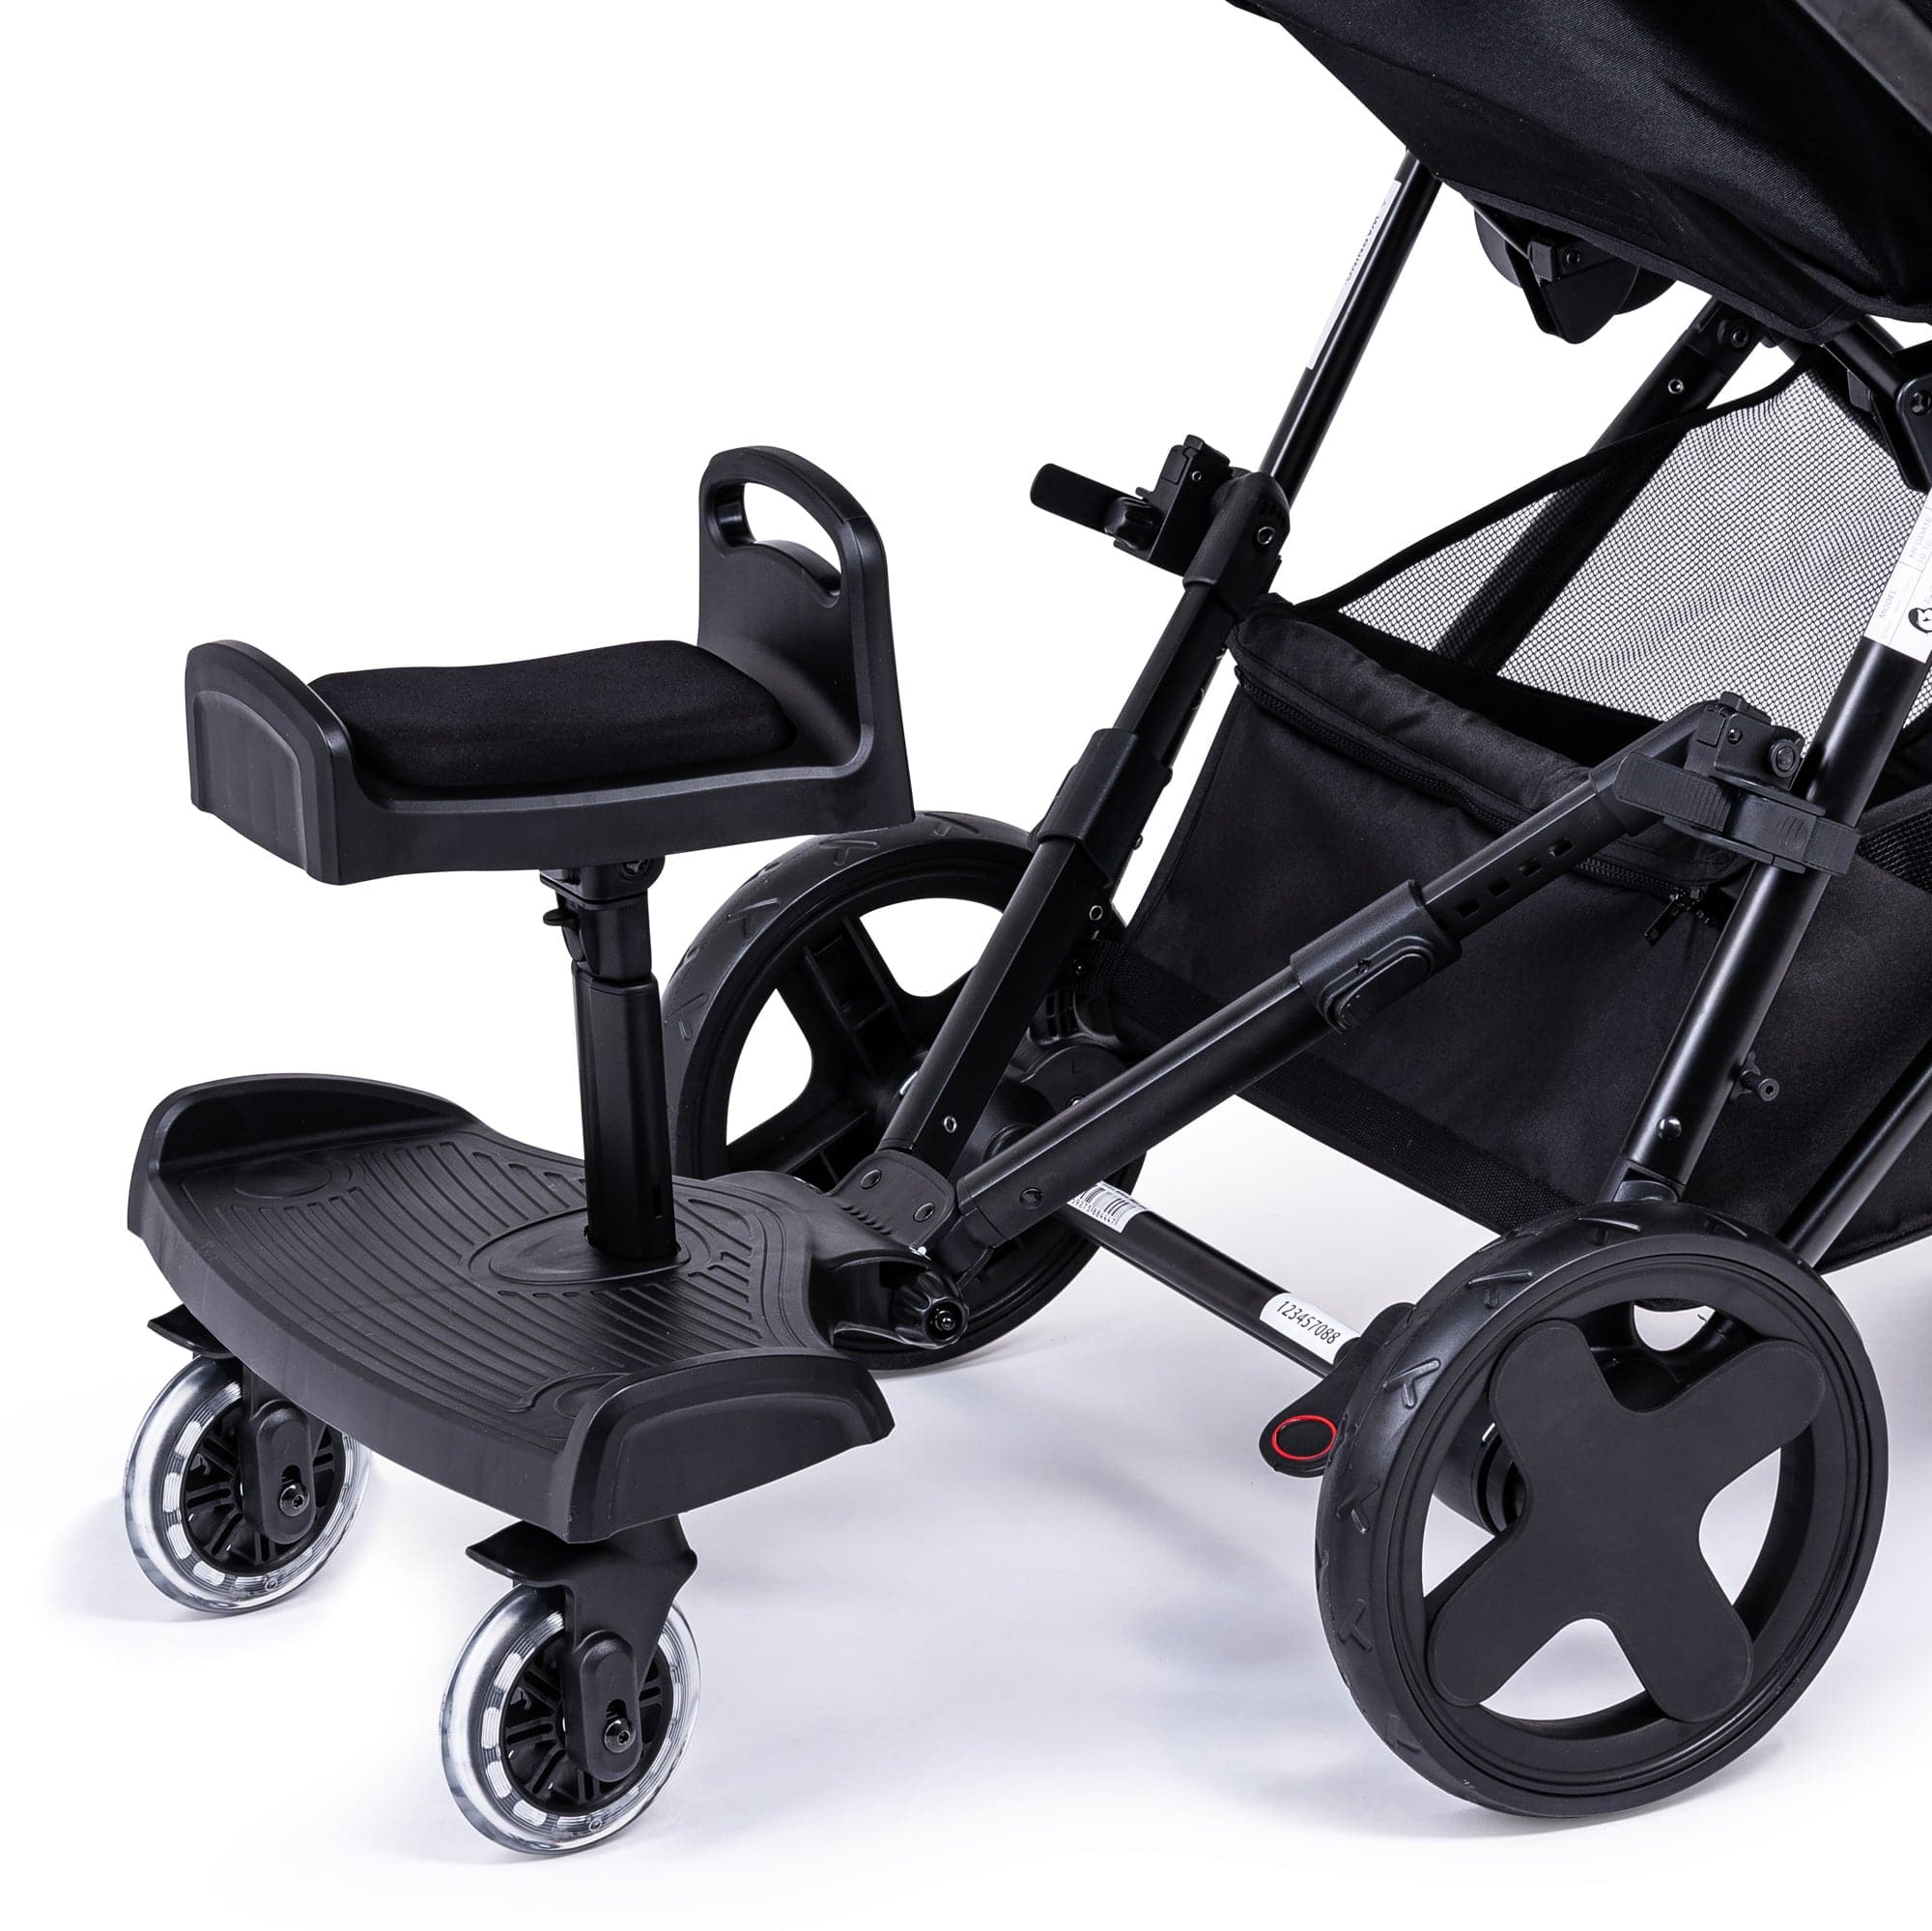 Ride On Board with Seat Compatible with Urban Detour - For Your Little One